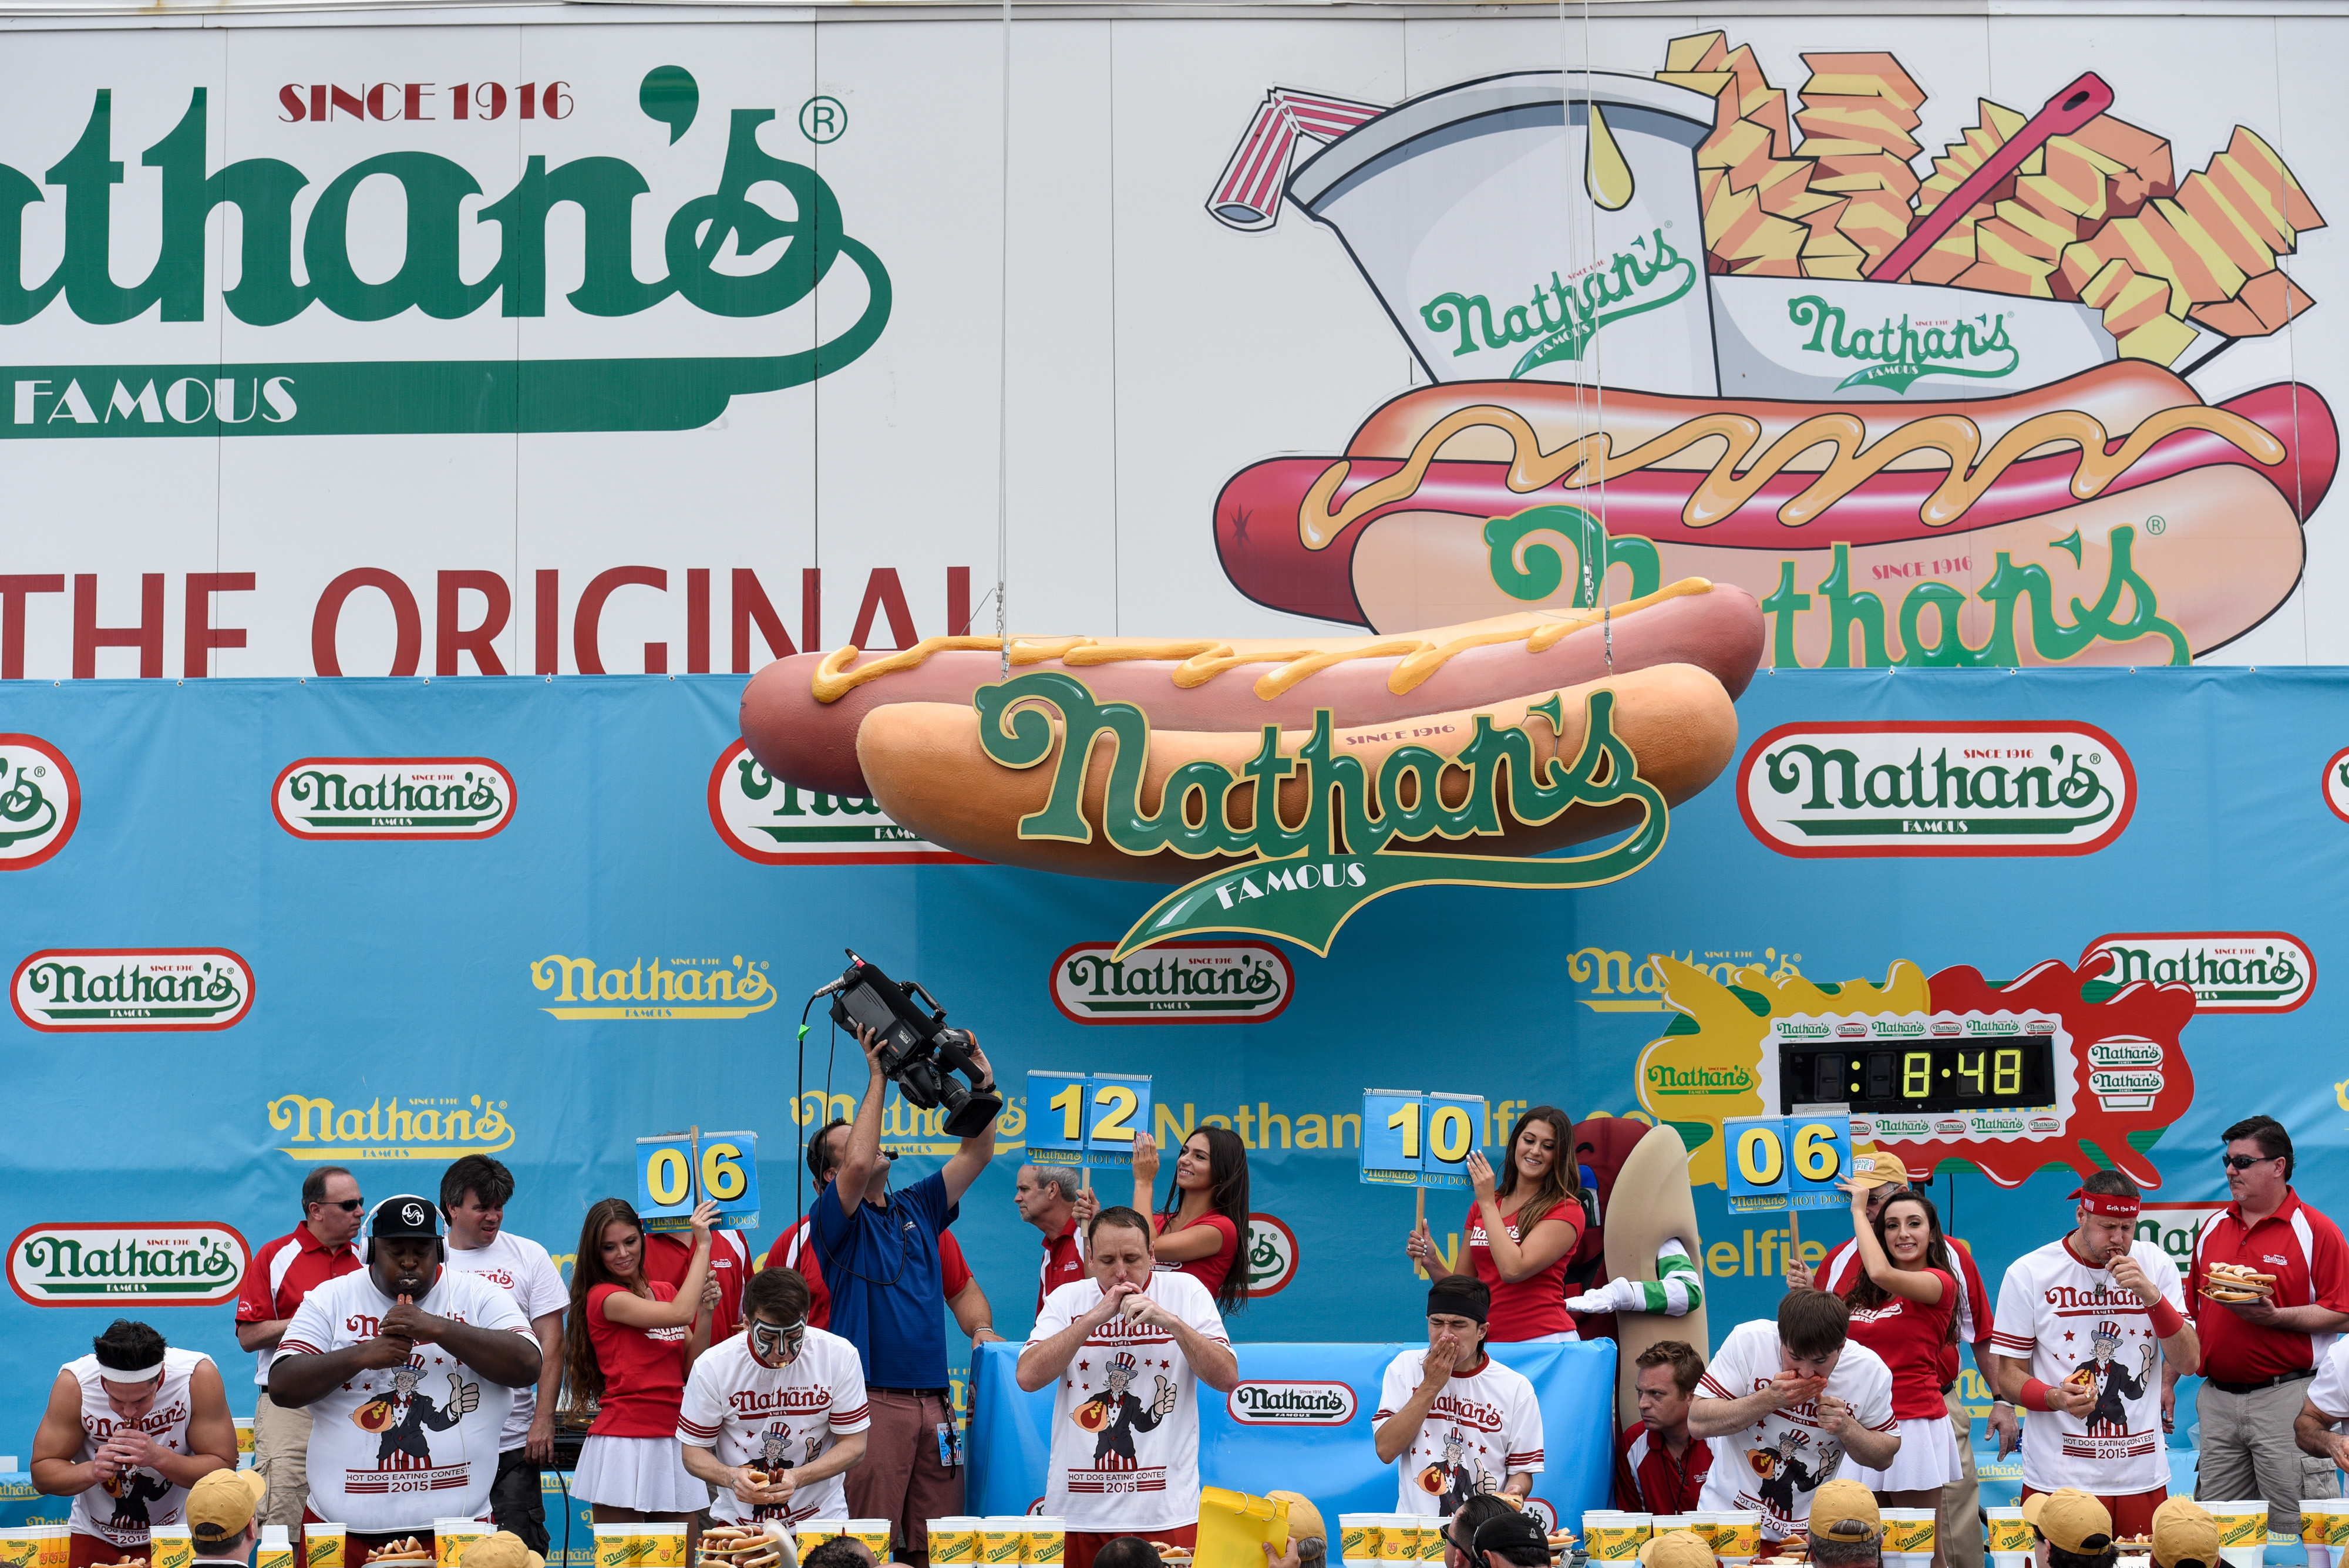 NEW YORK, NY - JULY 4: The mens round at The Nathan's Famous Fourth of July International Hot Dog-Eating Contest in Coney Island, New York, on July 4, 2015. The contest is an annual Fourth of July tradition.   Andrew Renneisen/Getty Images/AFP